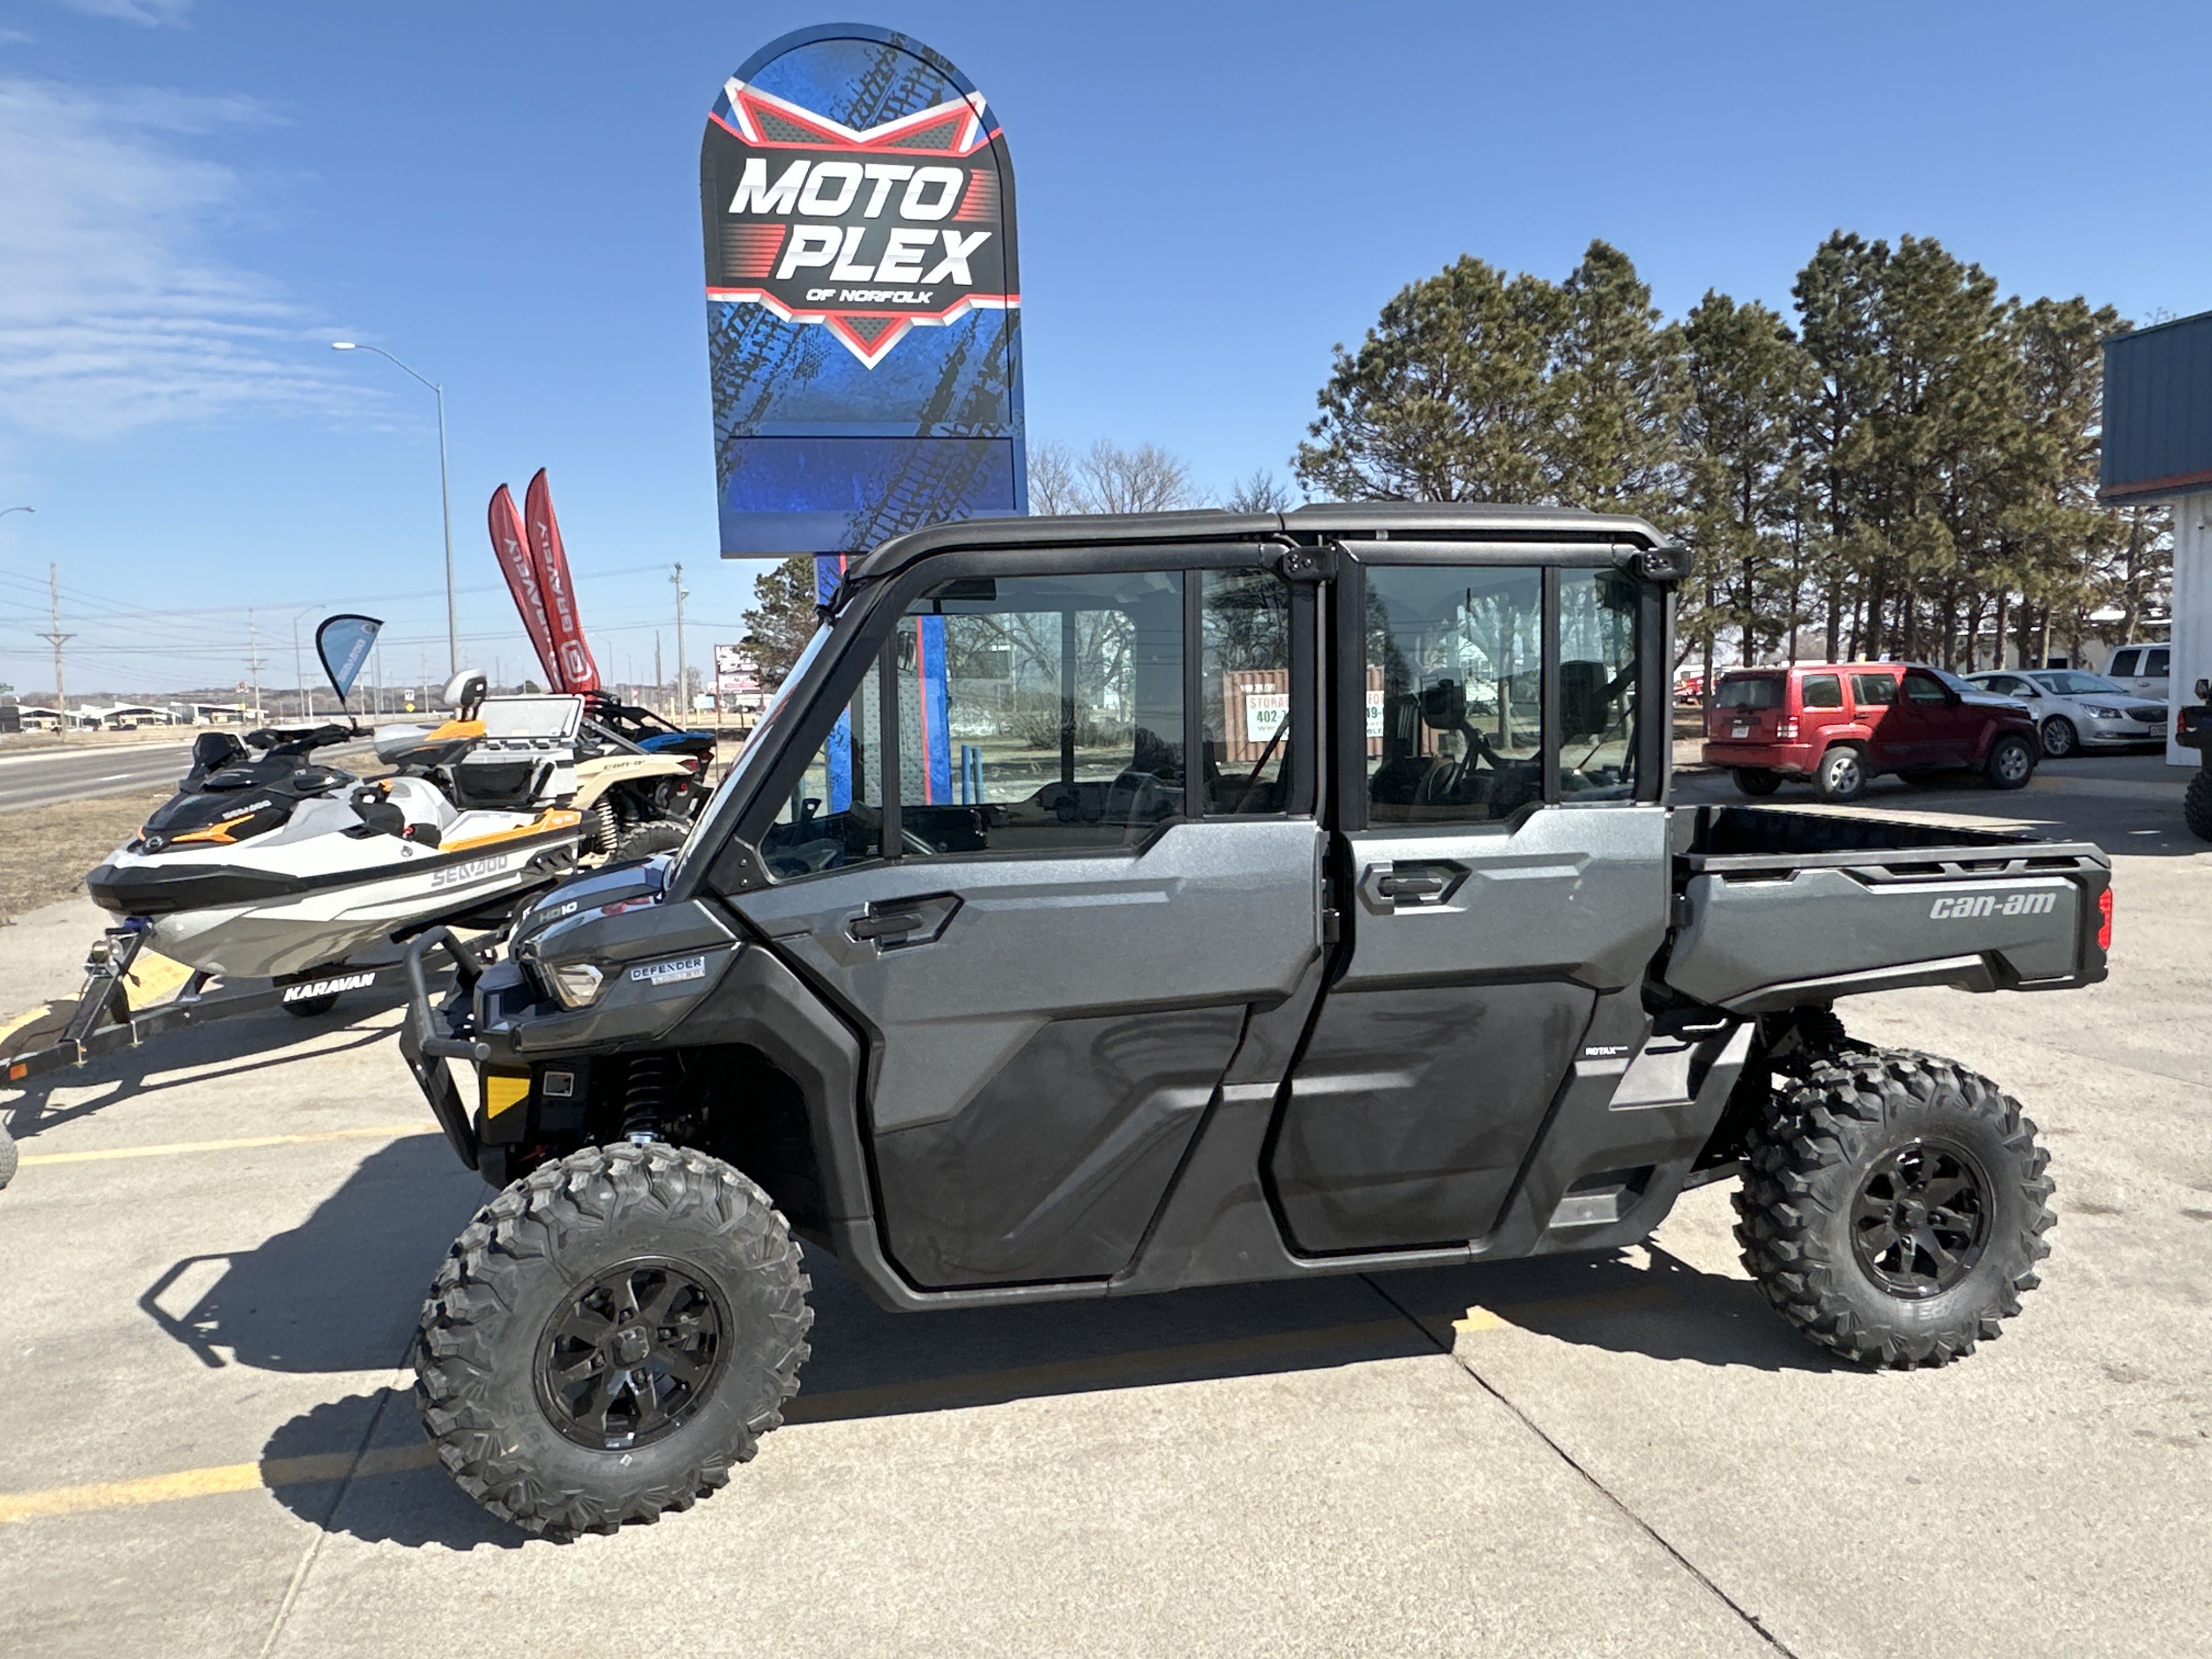 Motoplex of Norfolk offers New & Used Powersports